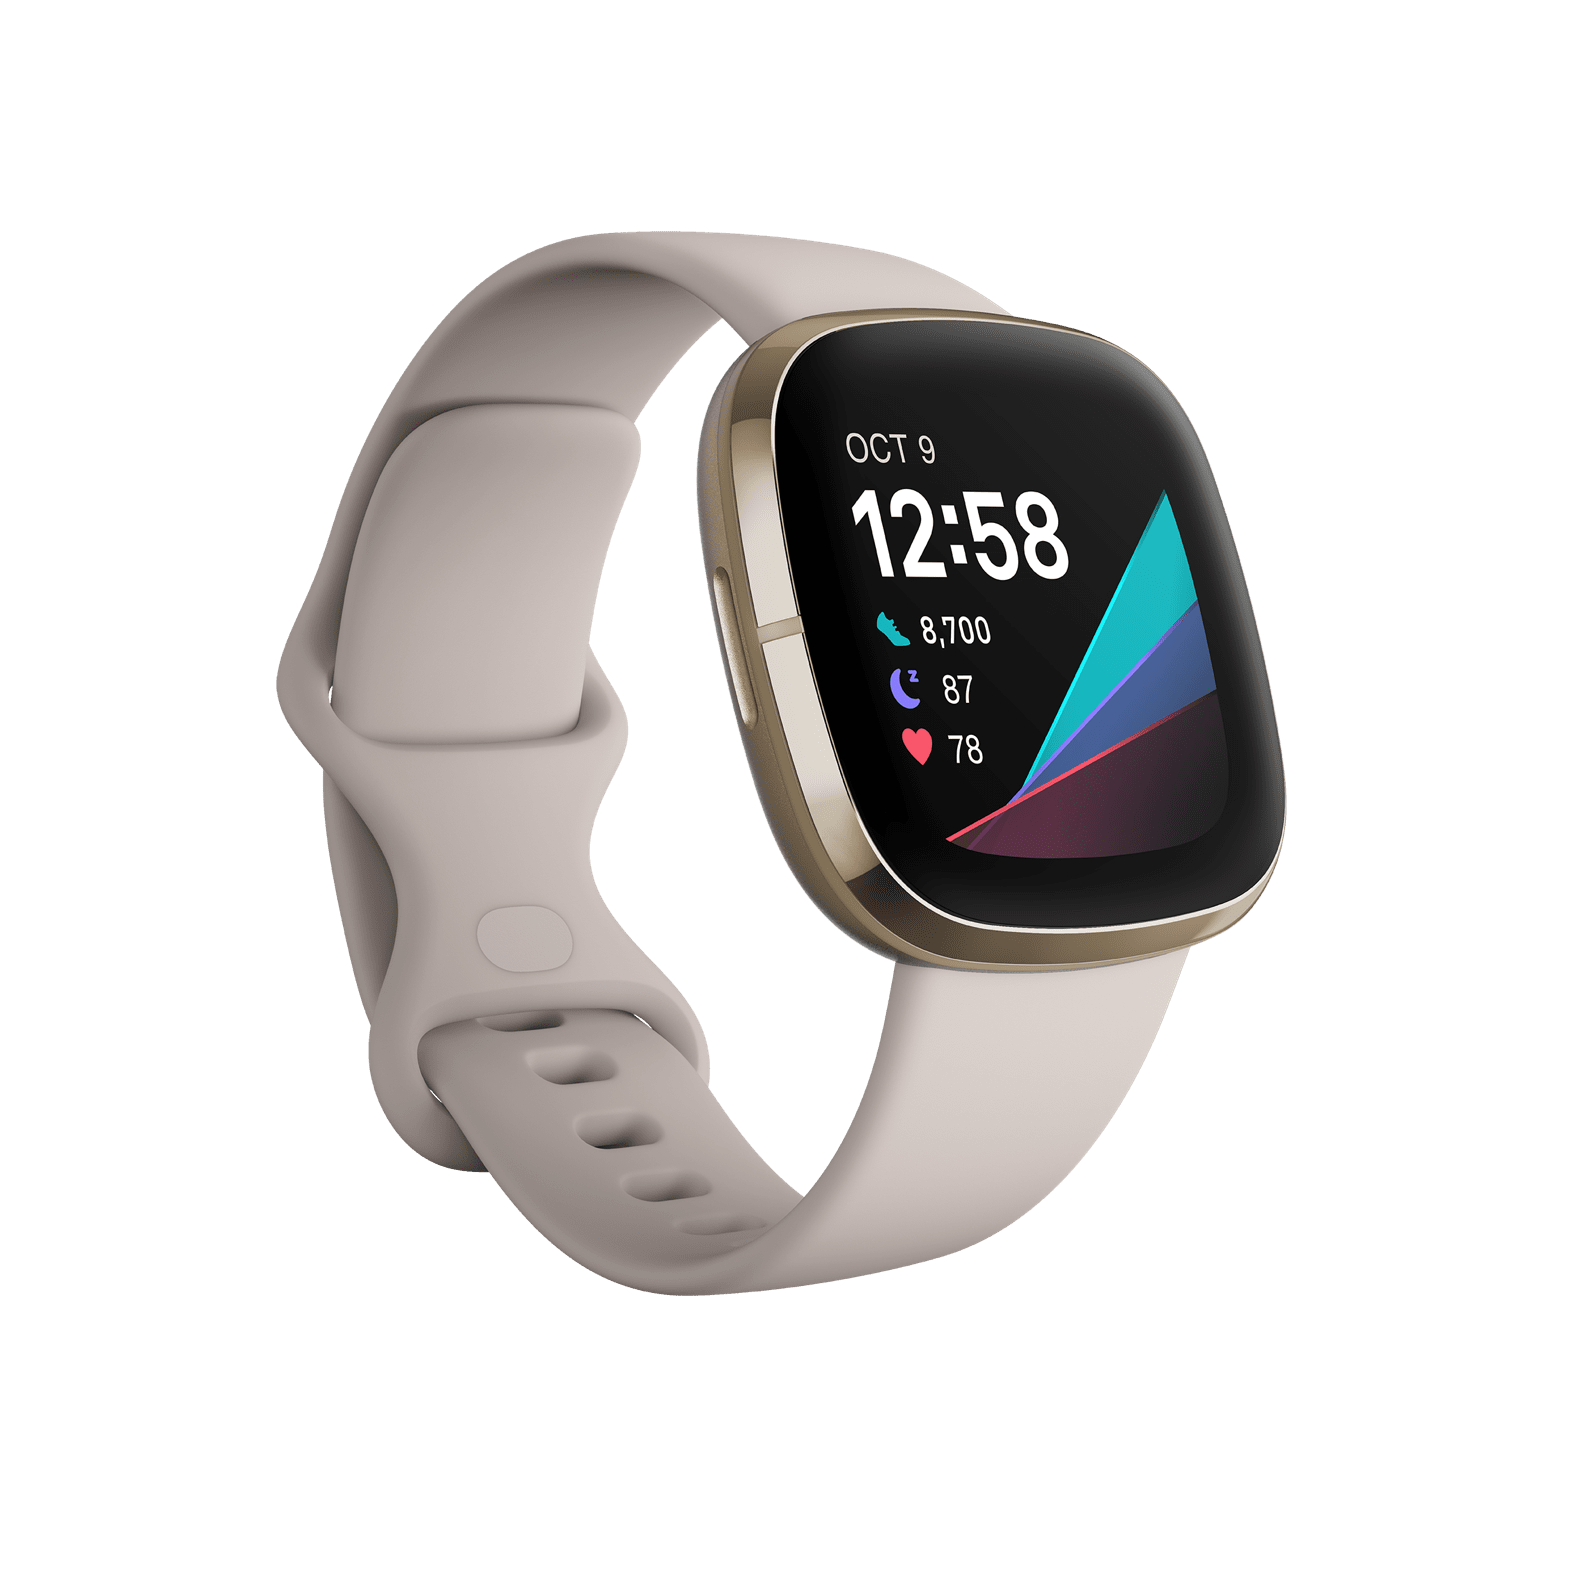 the newest fitbit watch